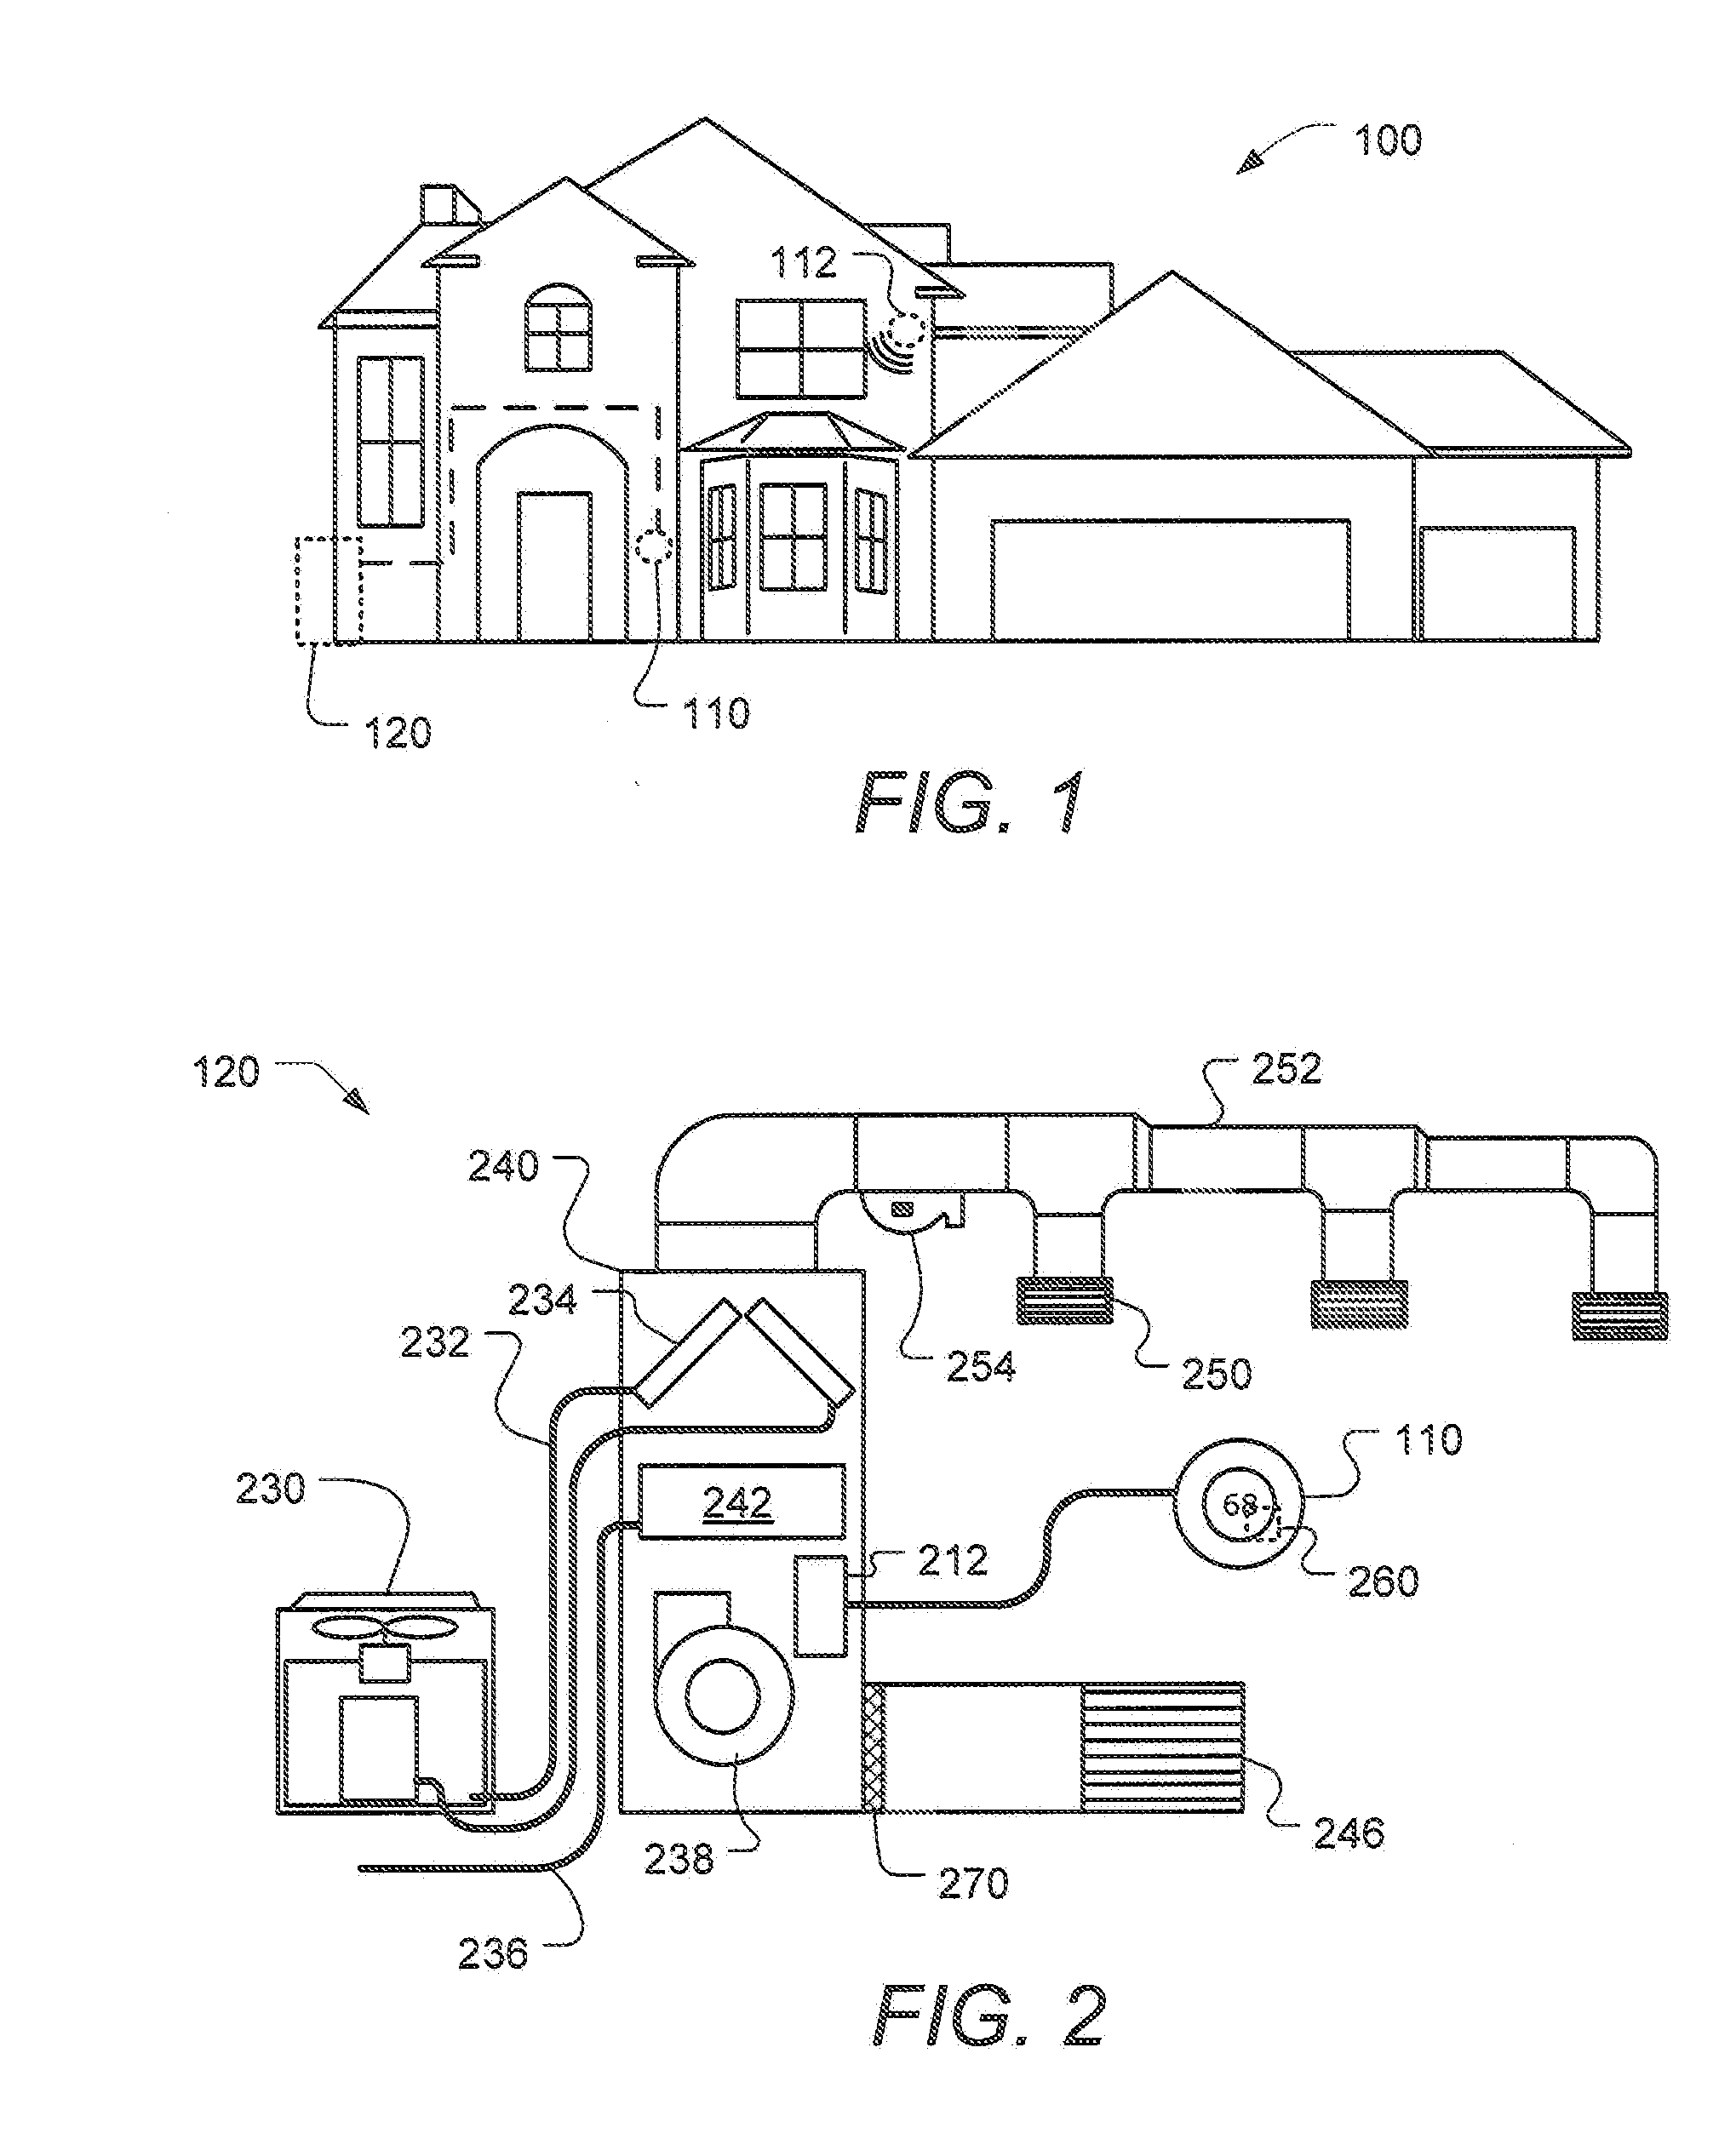 Thermostat graphical user interface